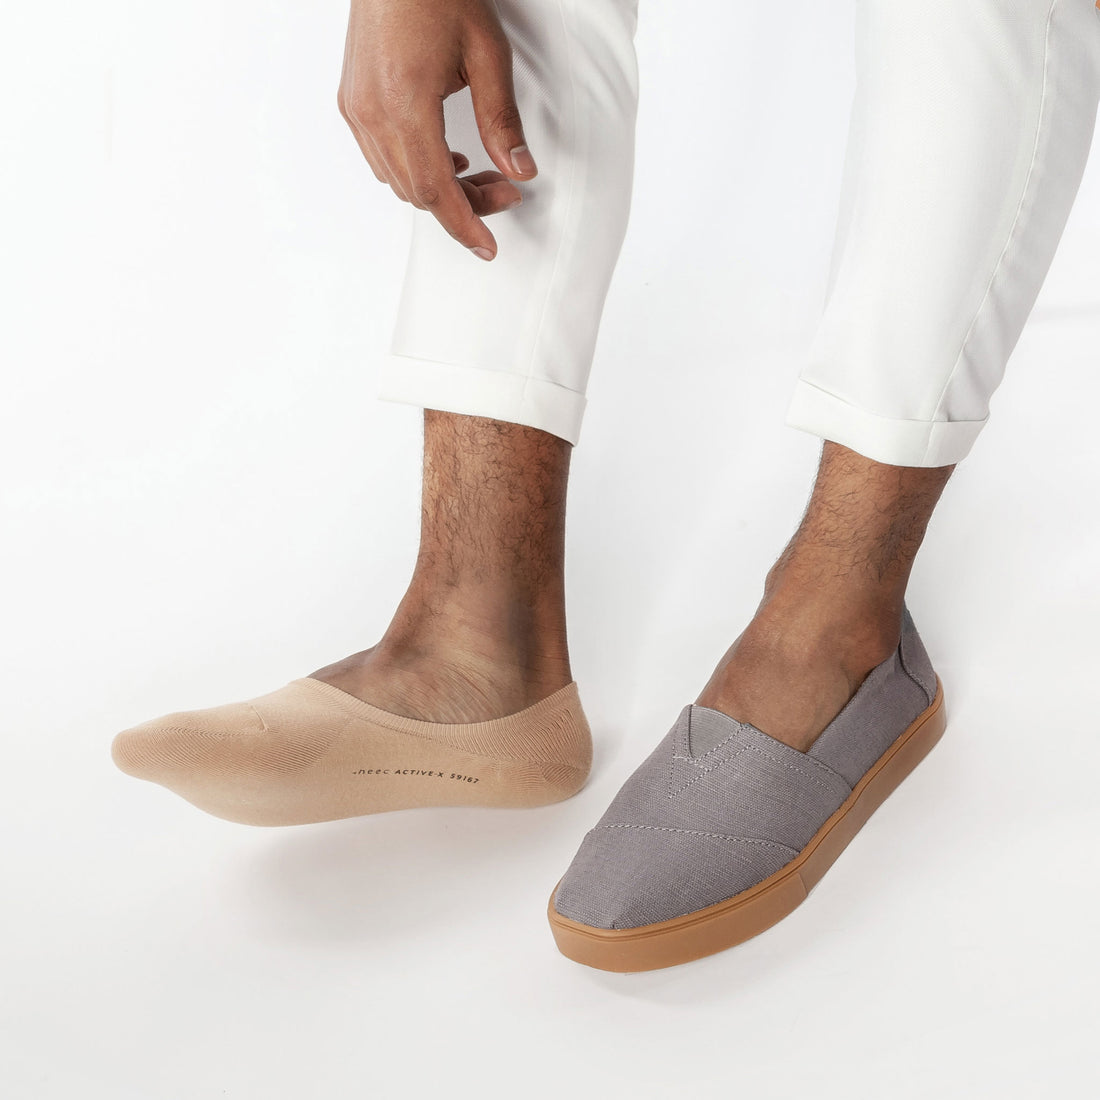 No show socks for men, pairs perfectly with men's slip on shoes. | Color-Beige